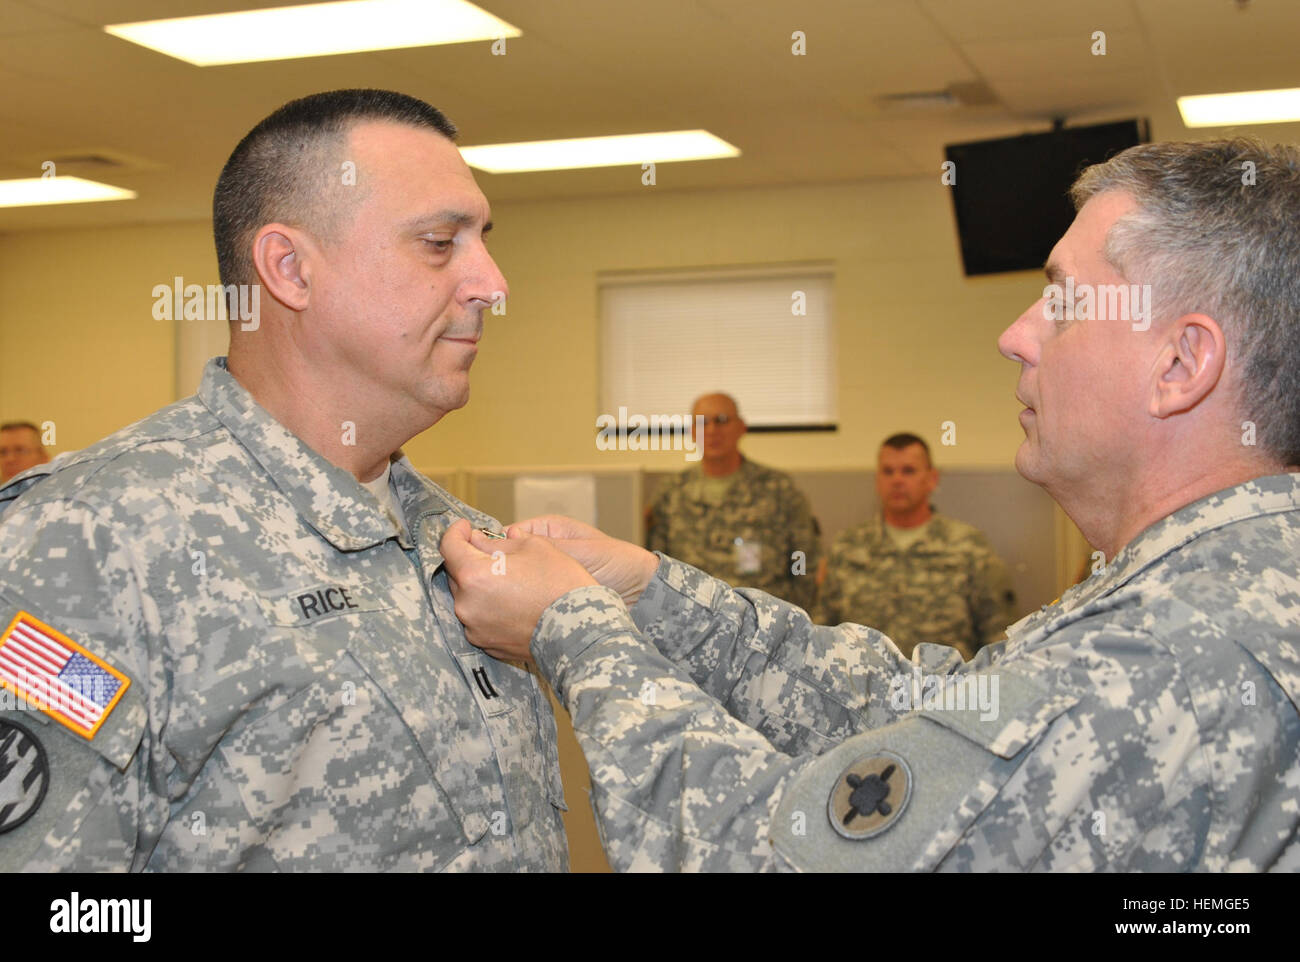 Capt. Gregory Rice receives the Army Commendation Medal for exceptional military service as commander of the 1687th Transportation Company from 184th SC Commander Brig. Gen. Janson D. Boyles during a ceremony held at CSJFTC April 7. 184th April Drill at Camp Shelby 130407-A-FQ119-005 Stock Photo